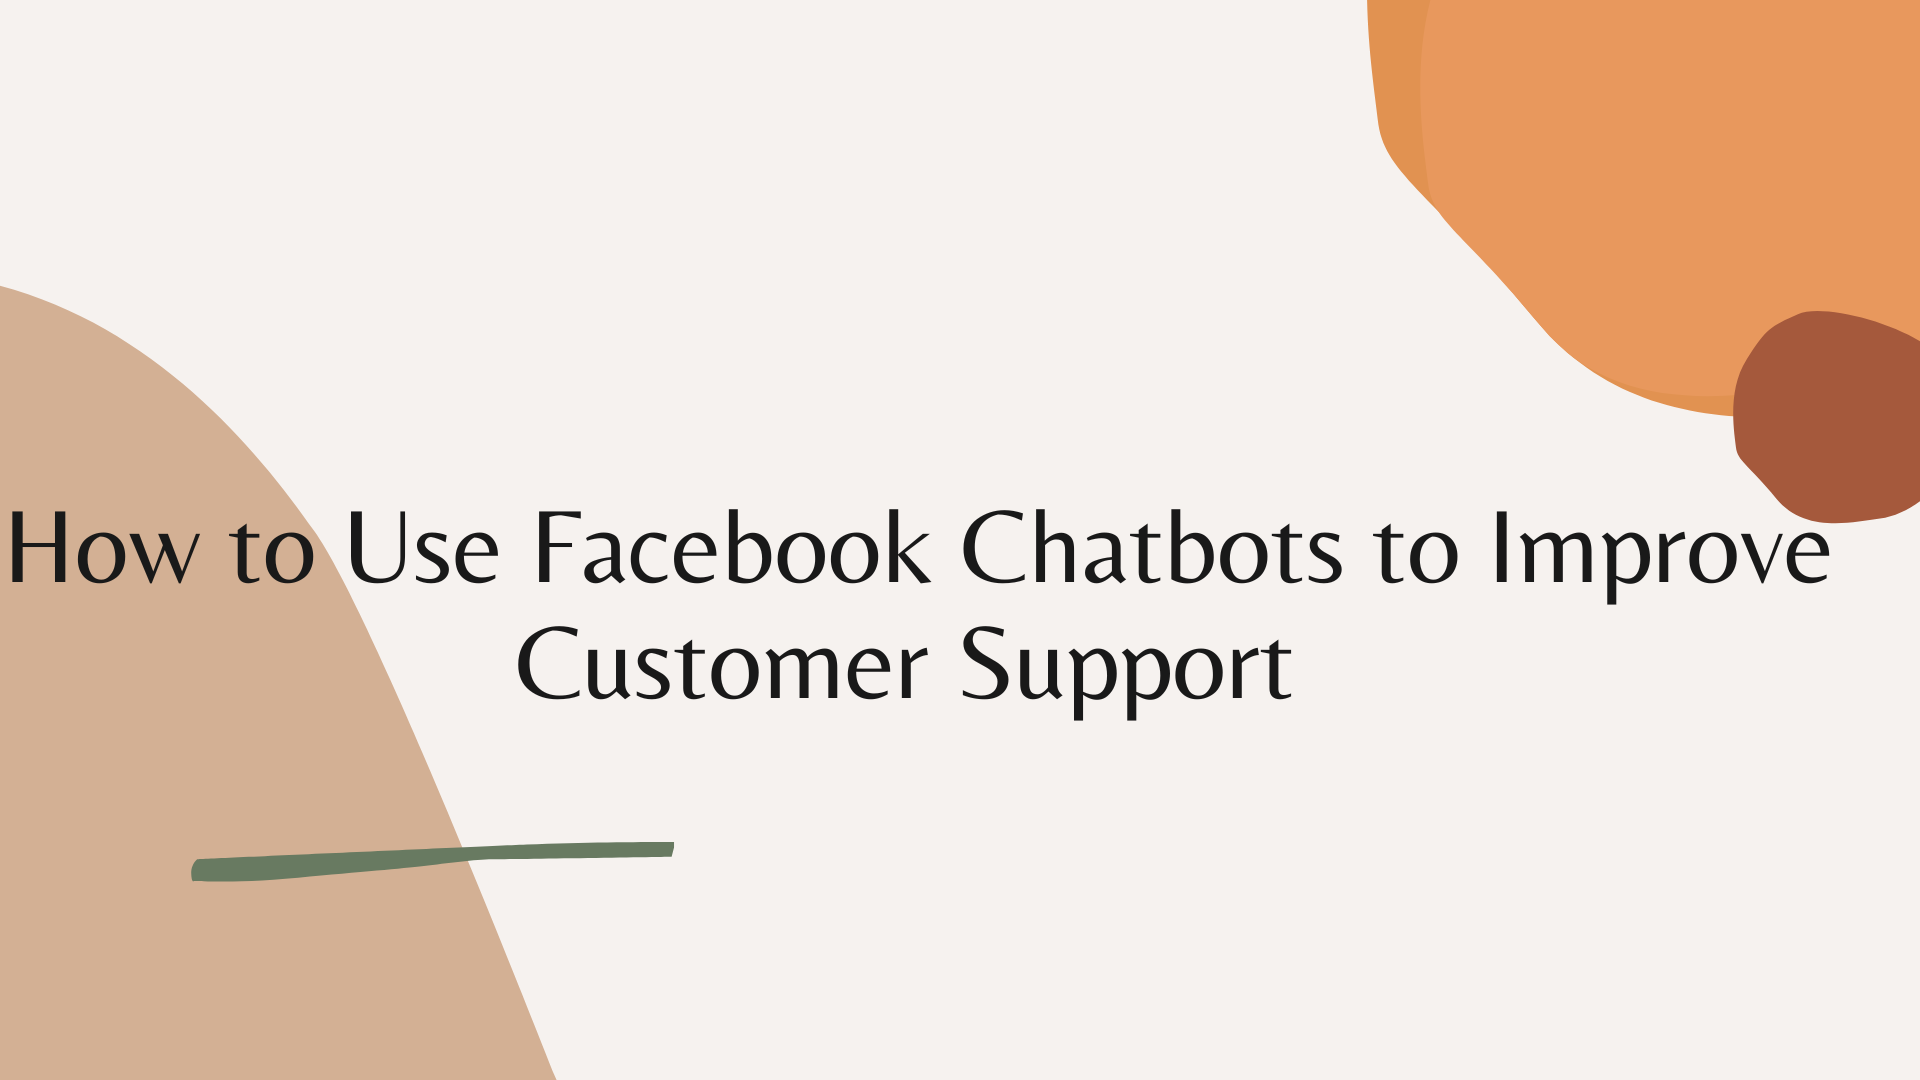 How to Use Facebook Chatbots to Improve Customer Support